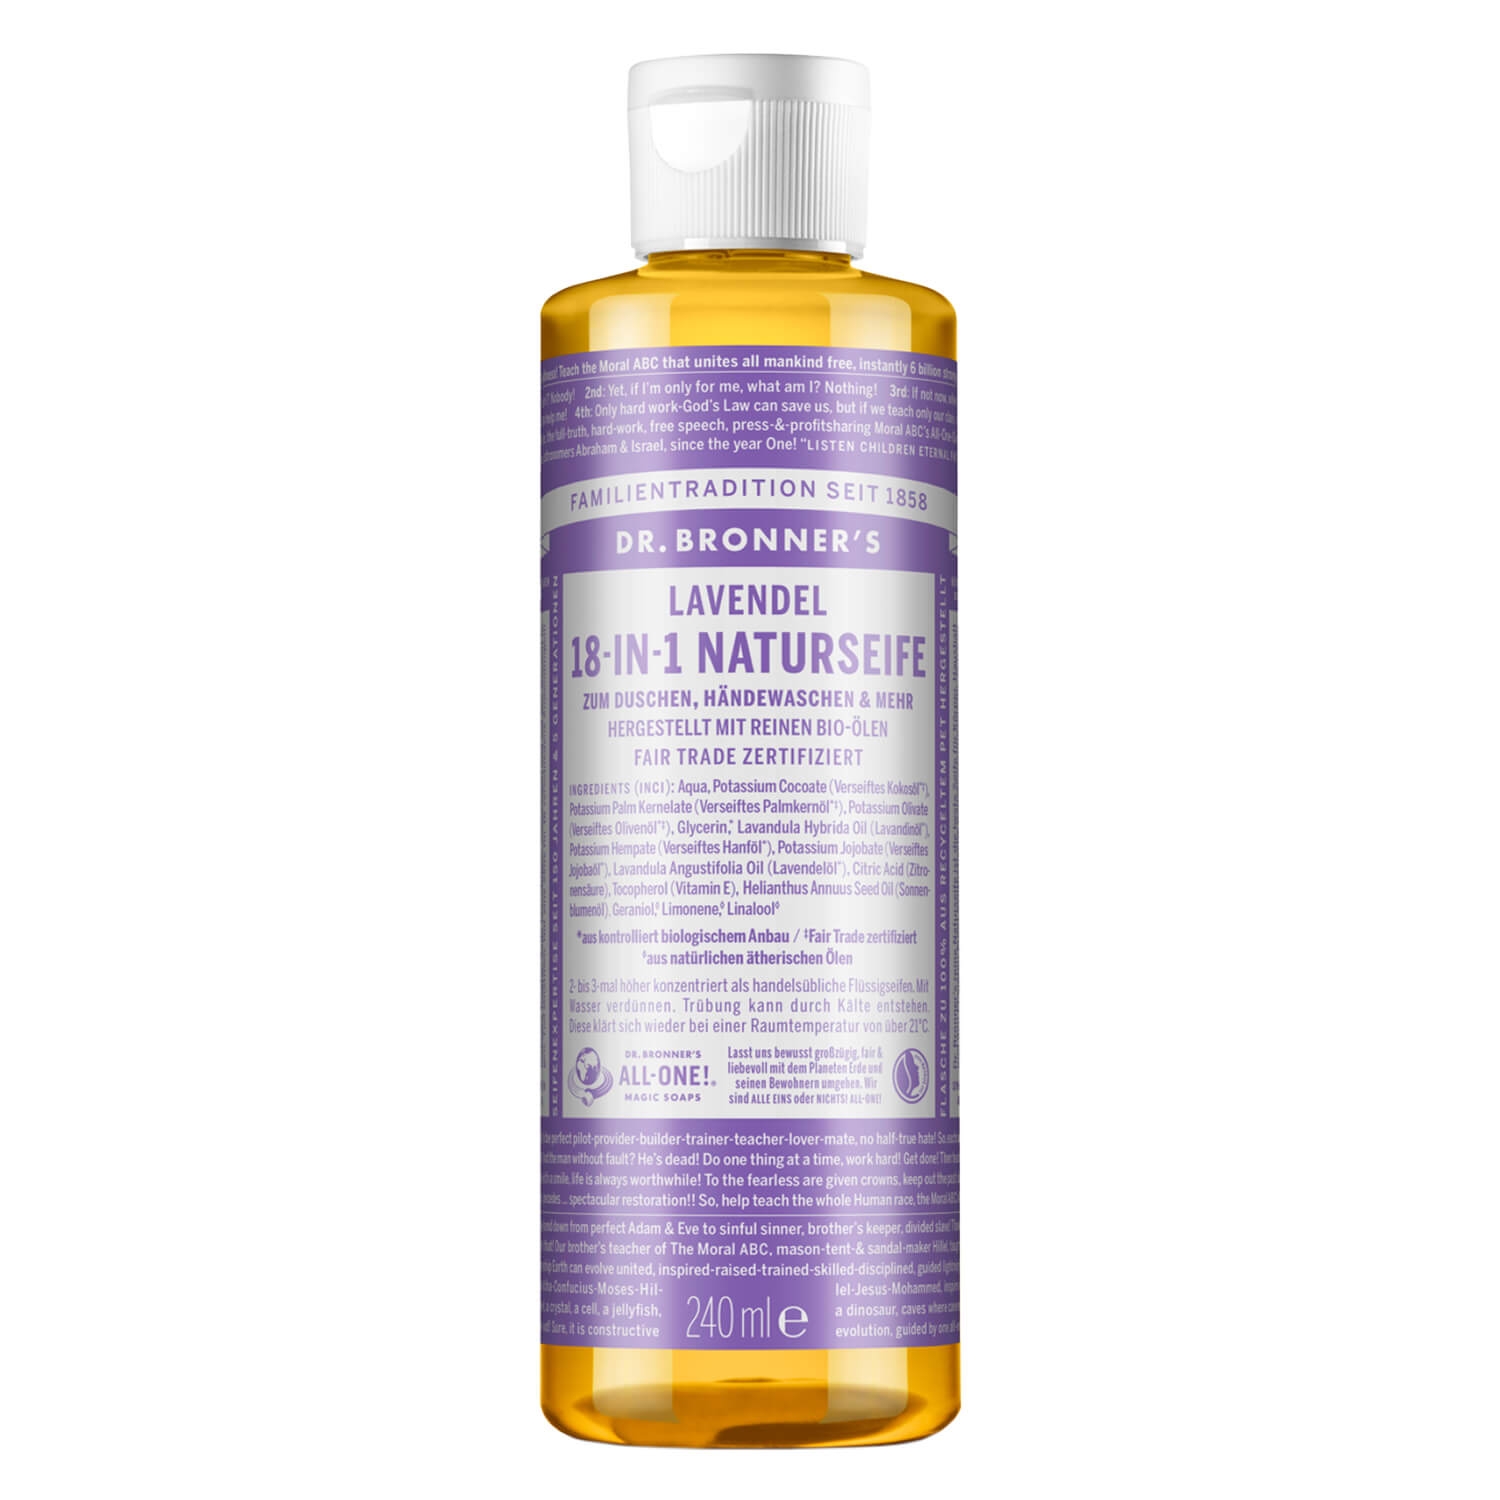 Product image from DR. BRONNER'S - 18-IN-1 Flüssigseife Lavender